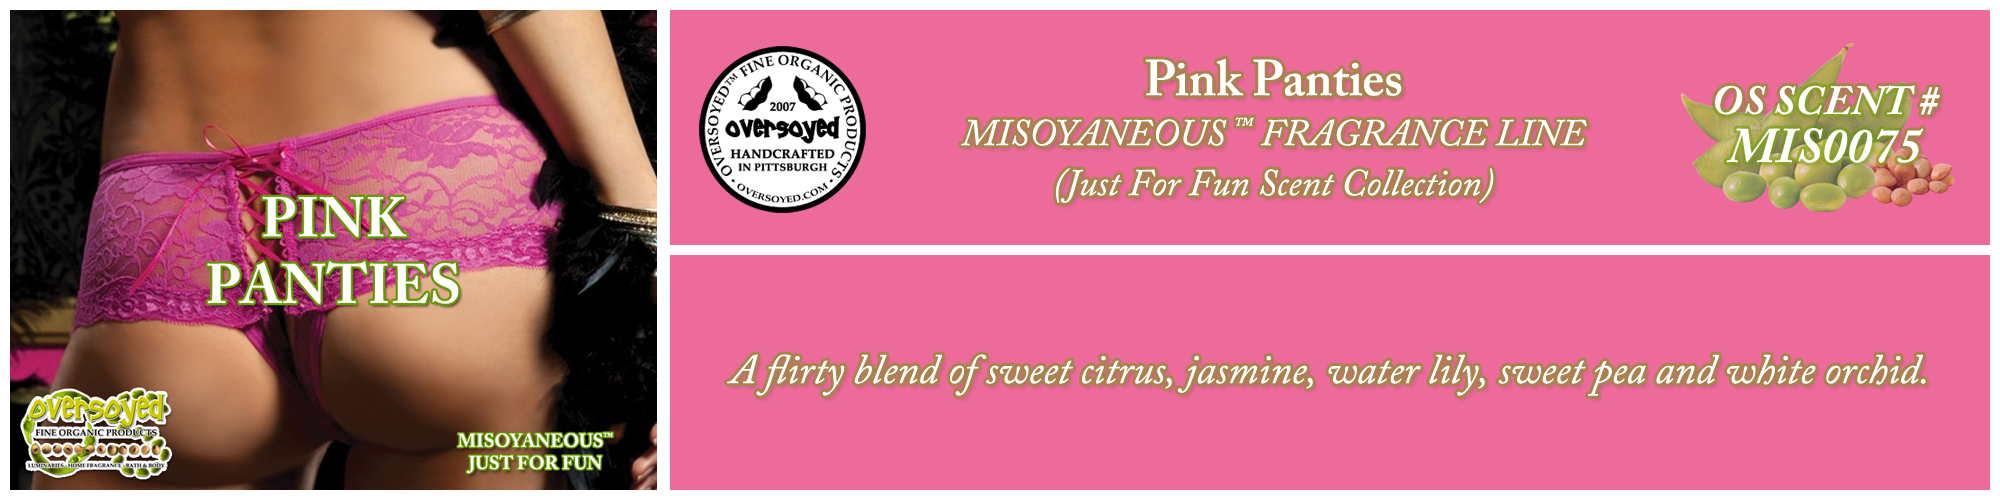 Pink Panties Handcrafted Products Collection